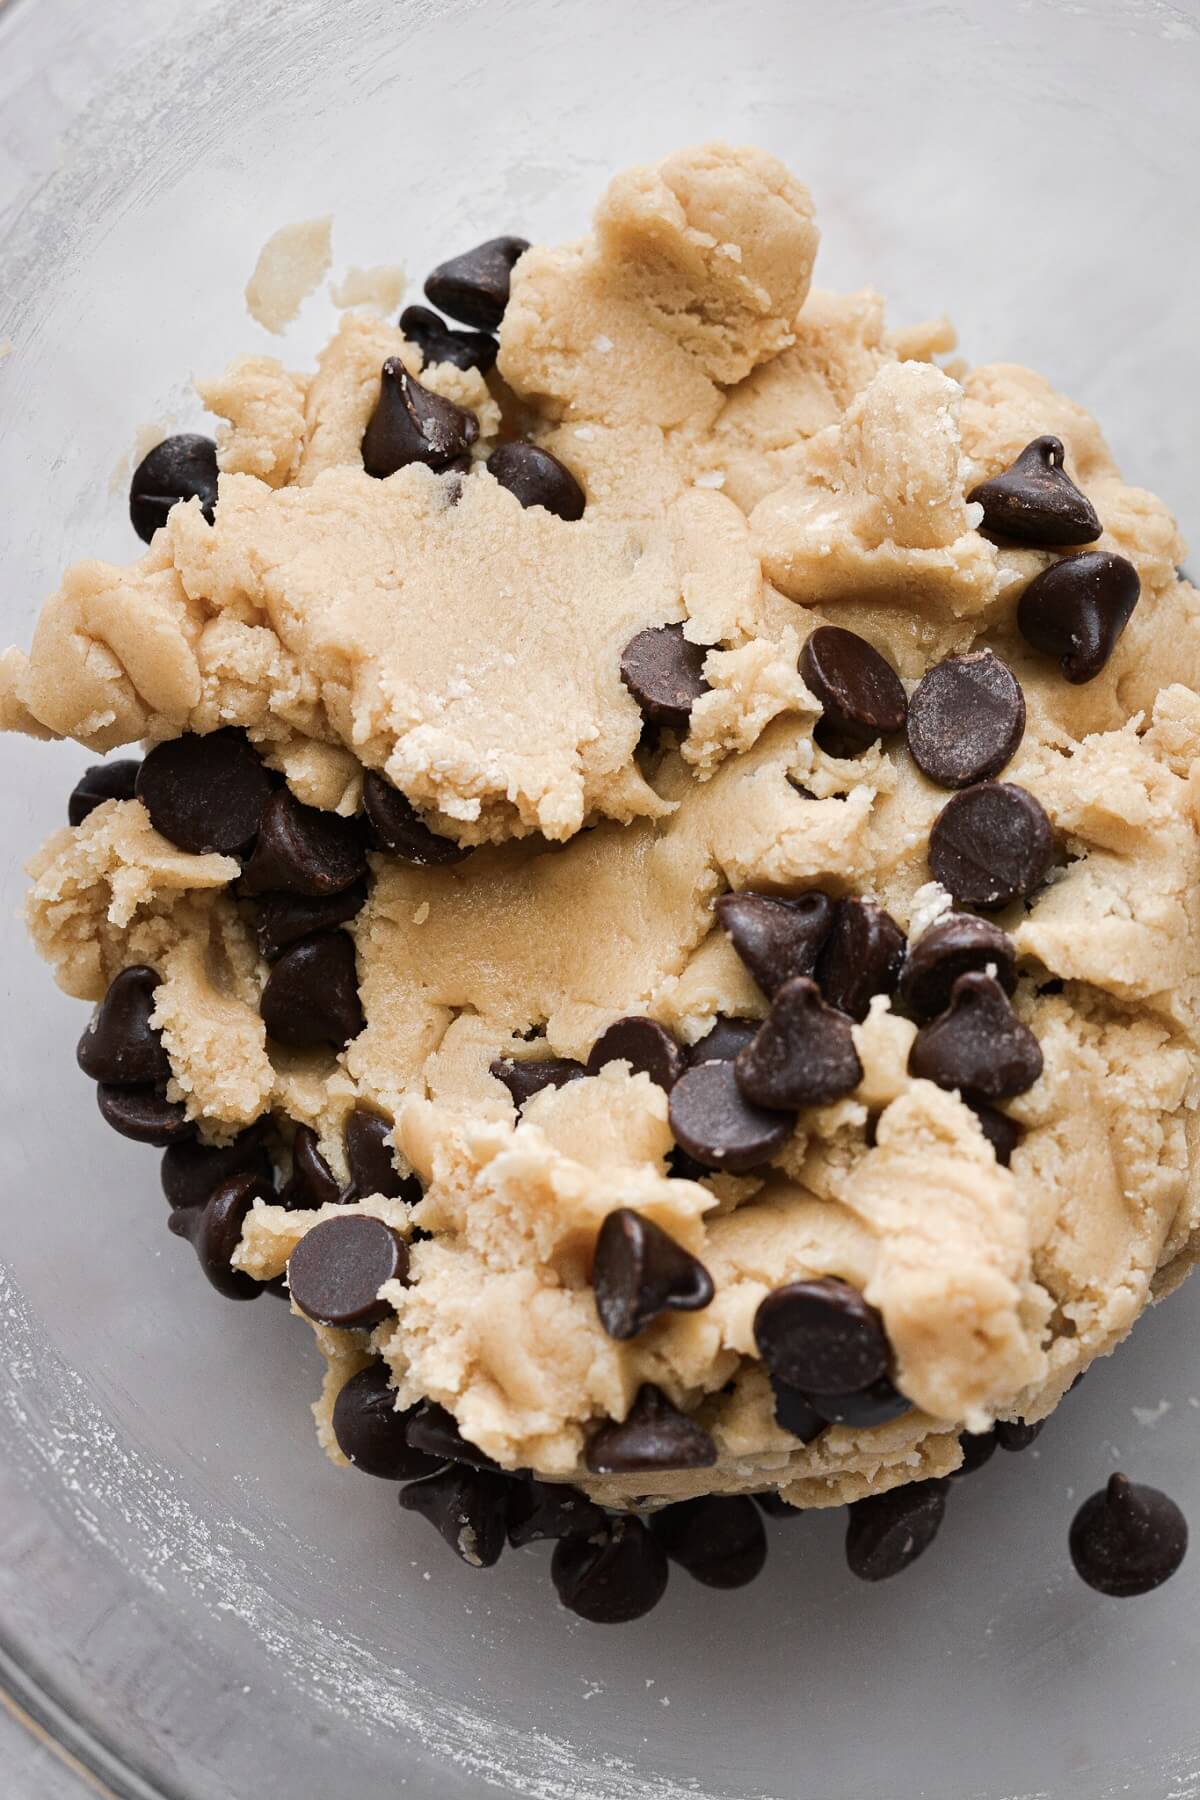 Bowl of chocolate chip cookie dough.